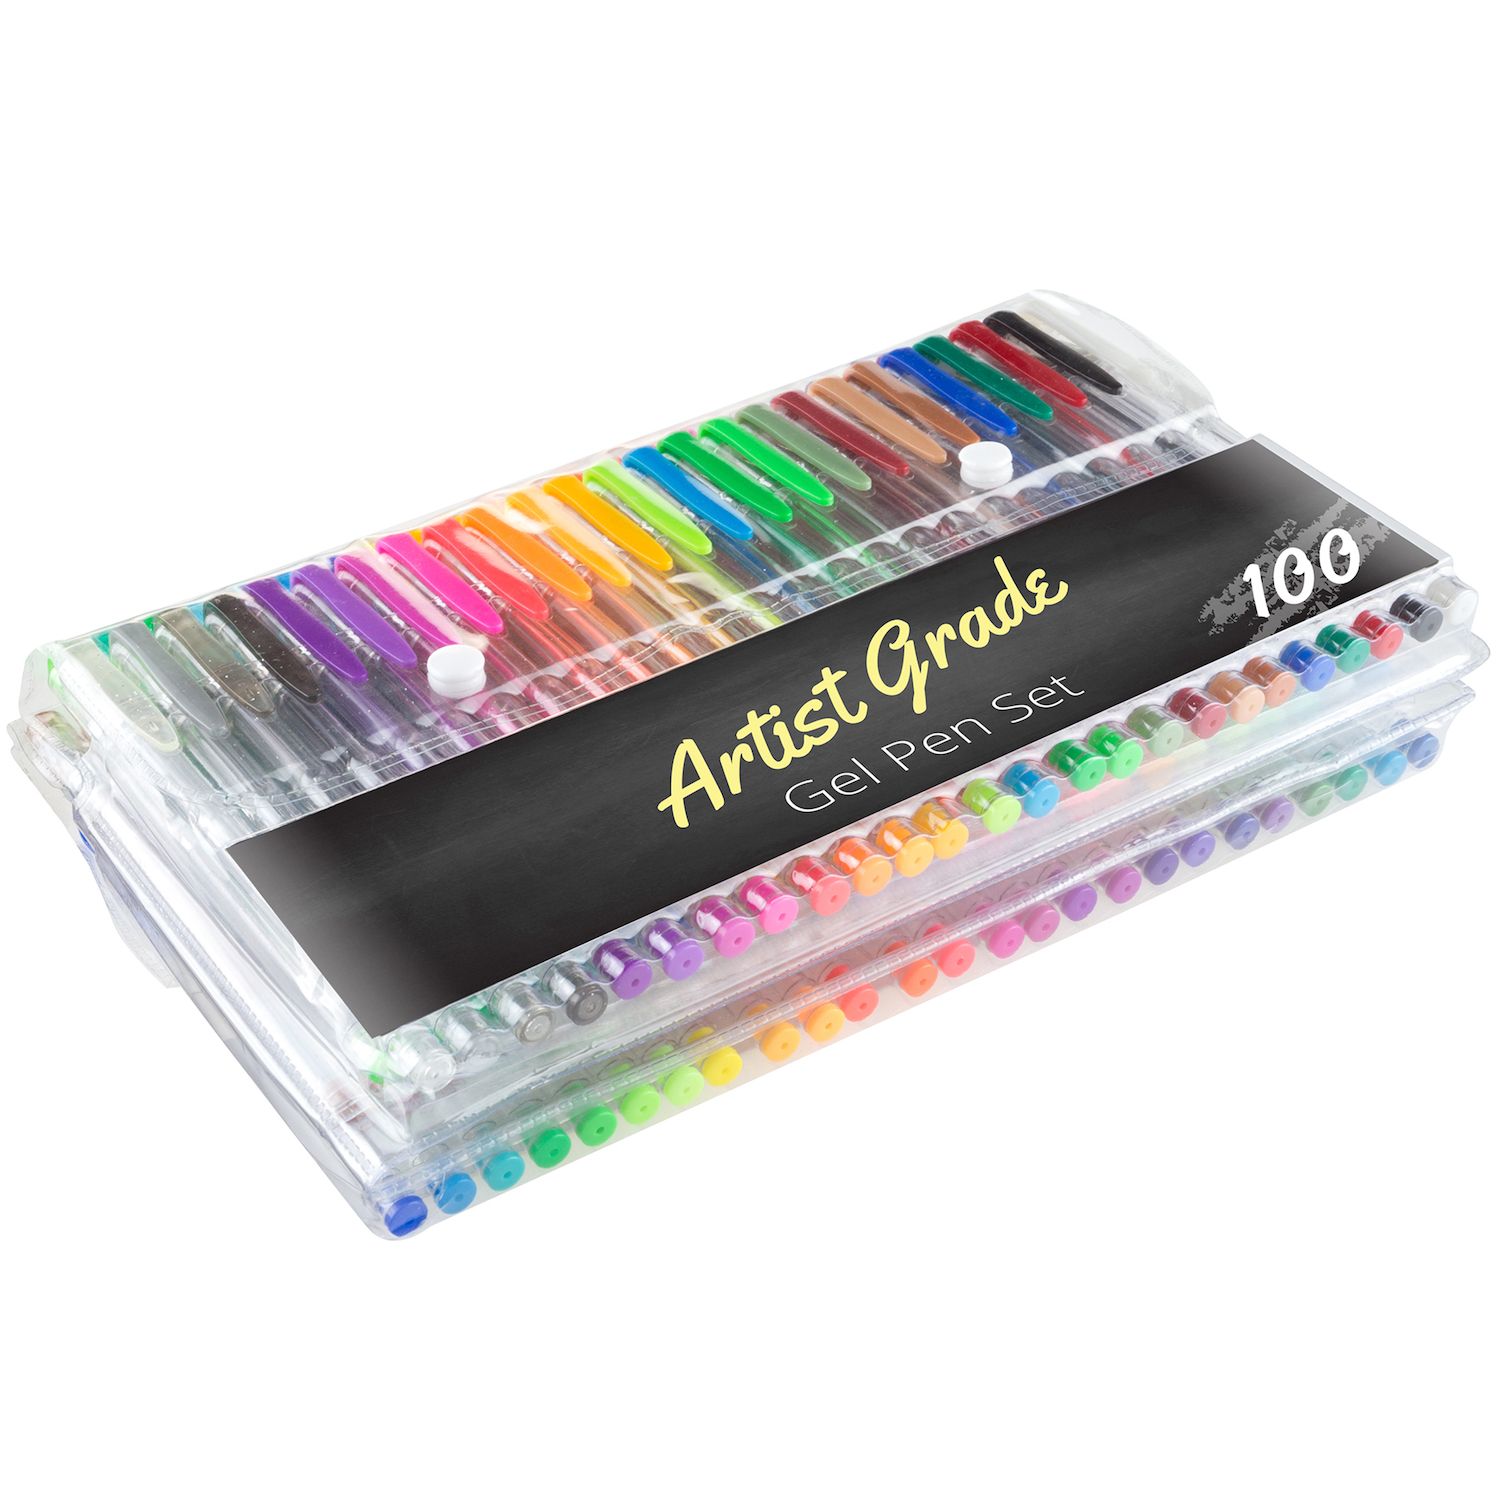 Crayola All-in-One Portable Art Studio for $9.99 (reg. $14.99